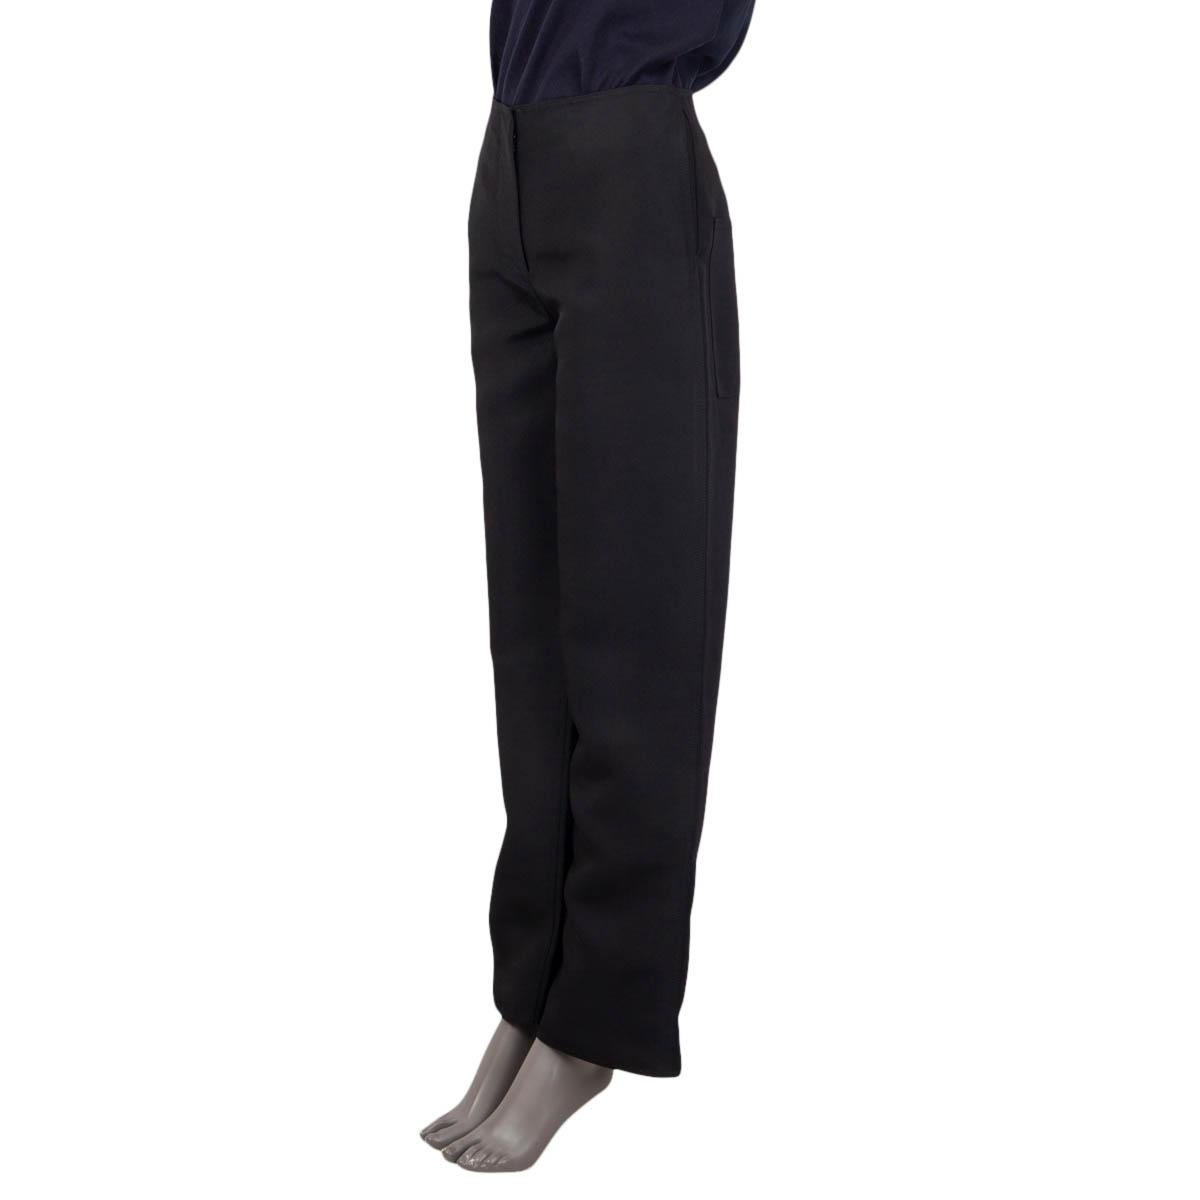 100% authentic The Row wide-leg pants in black viscose (87%) and silk (13%). Feature two slit pocktes on the front and two patch pockets on the back. Open with a concealed button, hook and zipper on the front. Lined in black cotton (100%). Have been